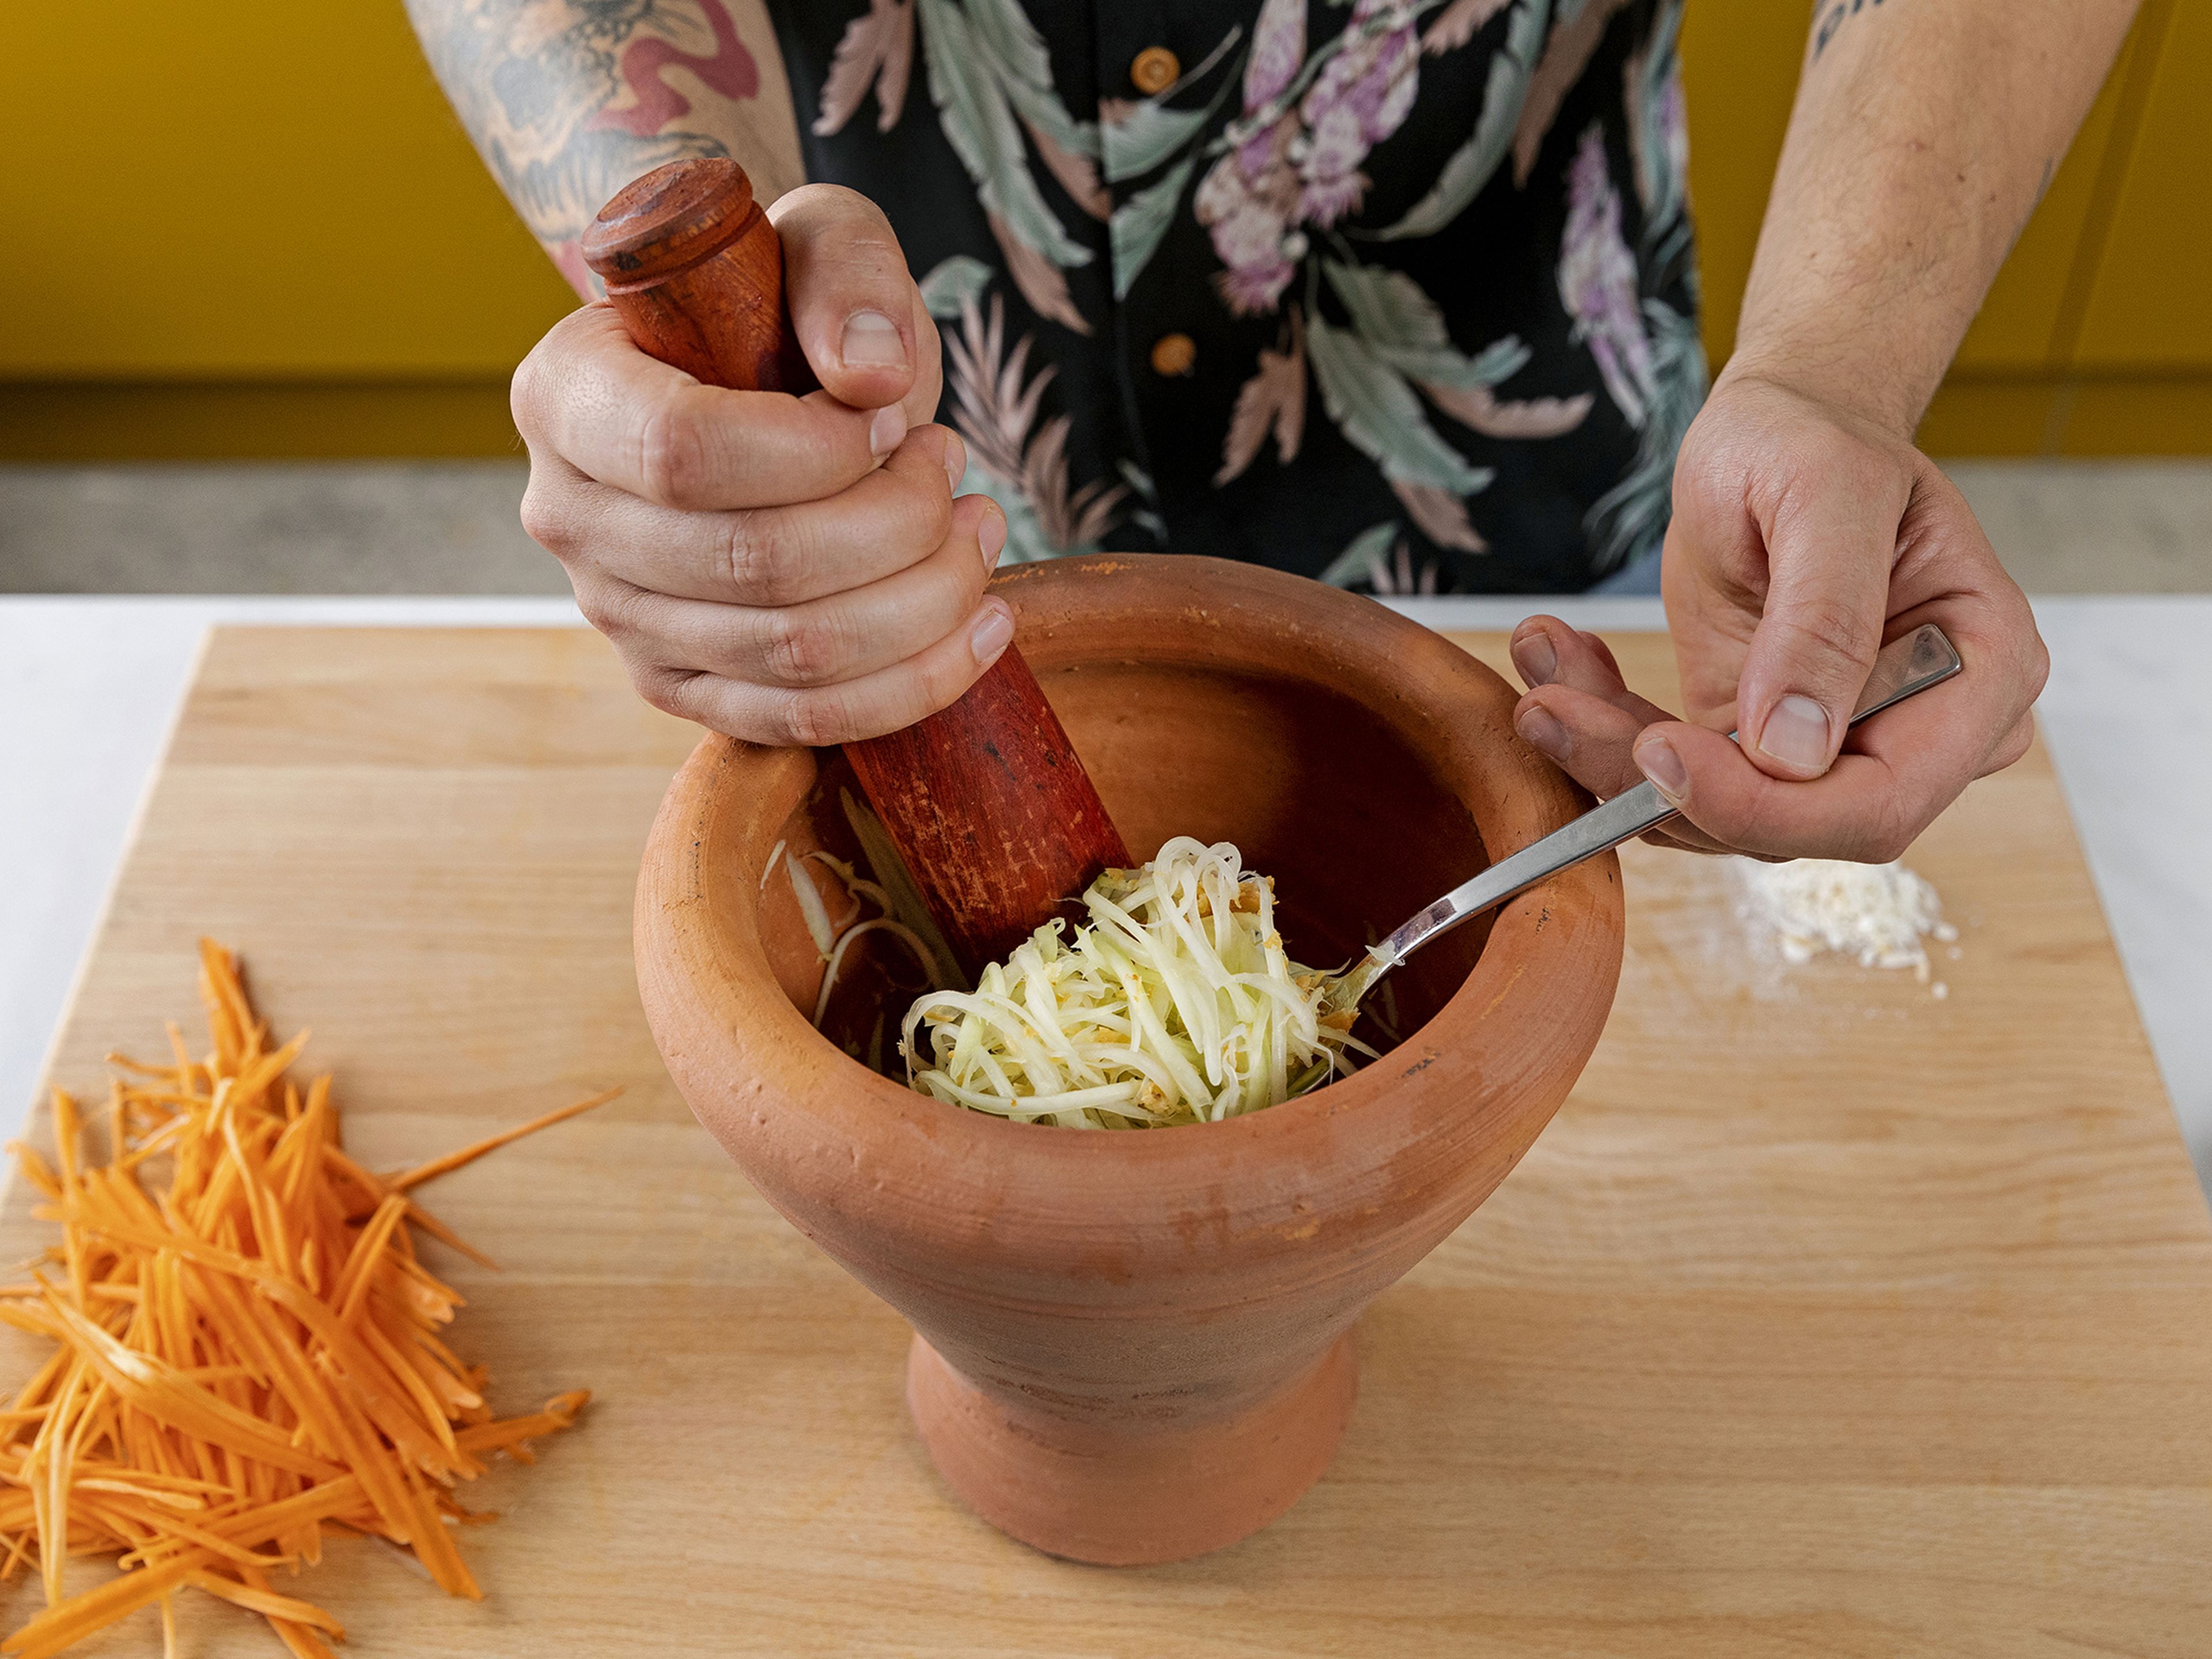 Add the garlic, chilli, and drained shrimp to a mortar and pestle and pound until chilis are broken apart. Now add one-third of the papaya and gently pound until papaya is tender but not mushy.